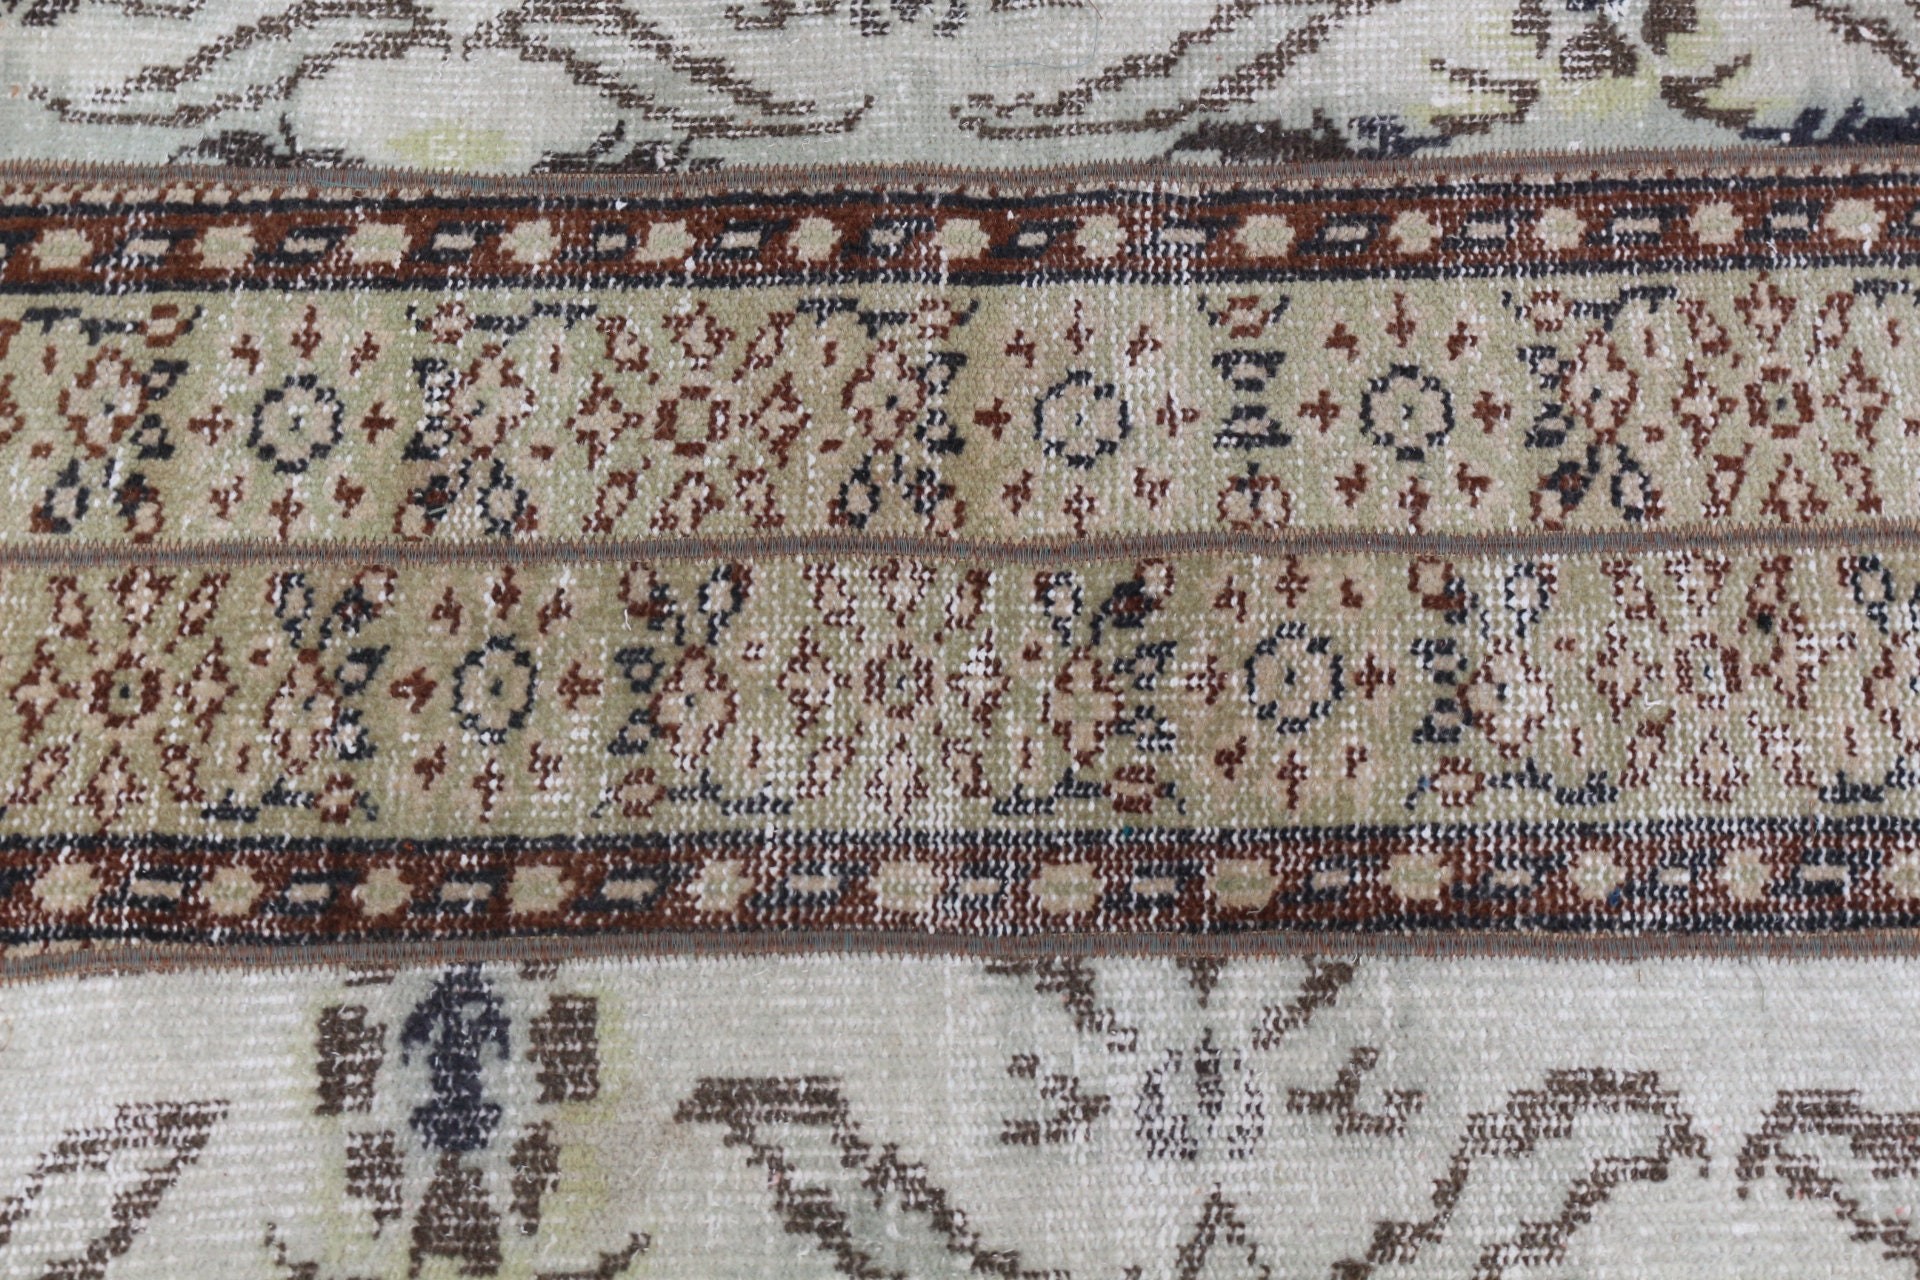 Beige Cool Rug, Bedroom Rug, Turkish Rugs, Bath Rug, 2.3x4 ft Small Rug, Rugs for Kitchen, Gift For The Home Rug, Vintage Rugs, Cool Rug